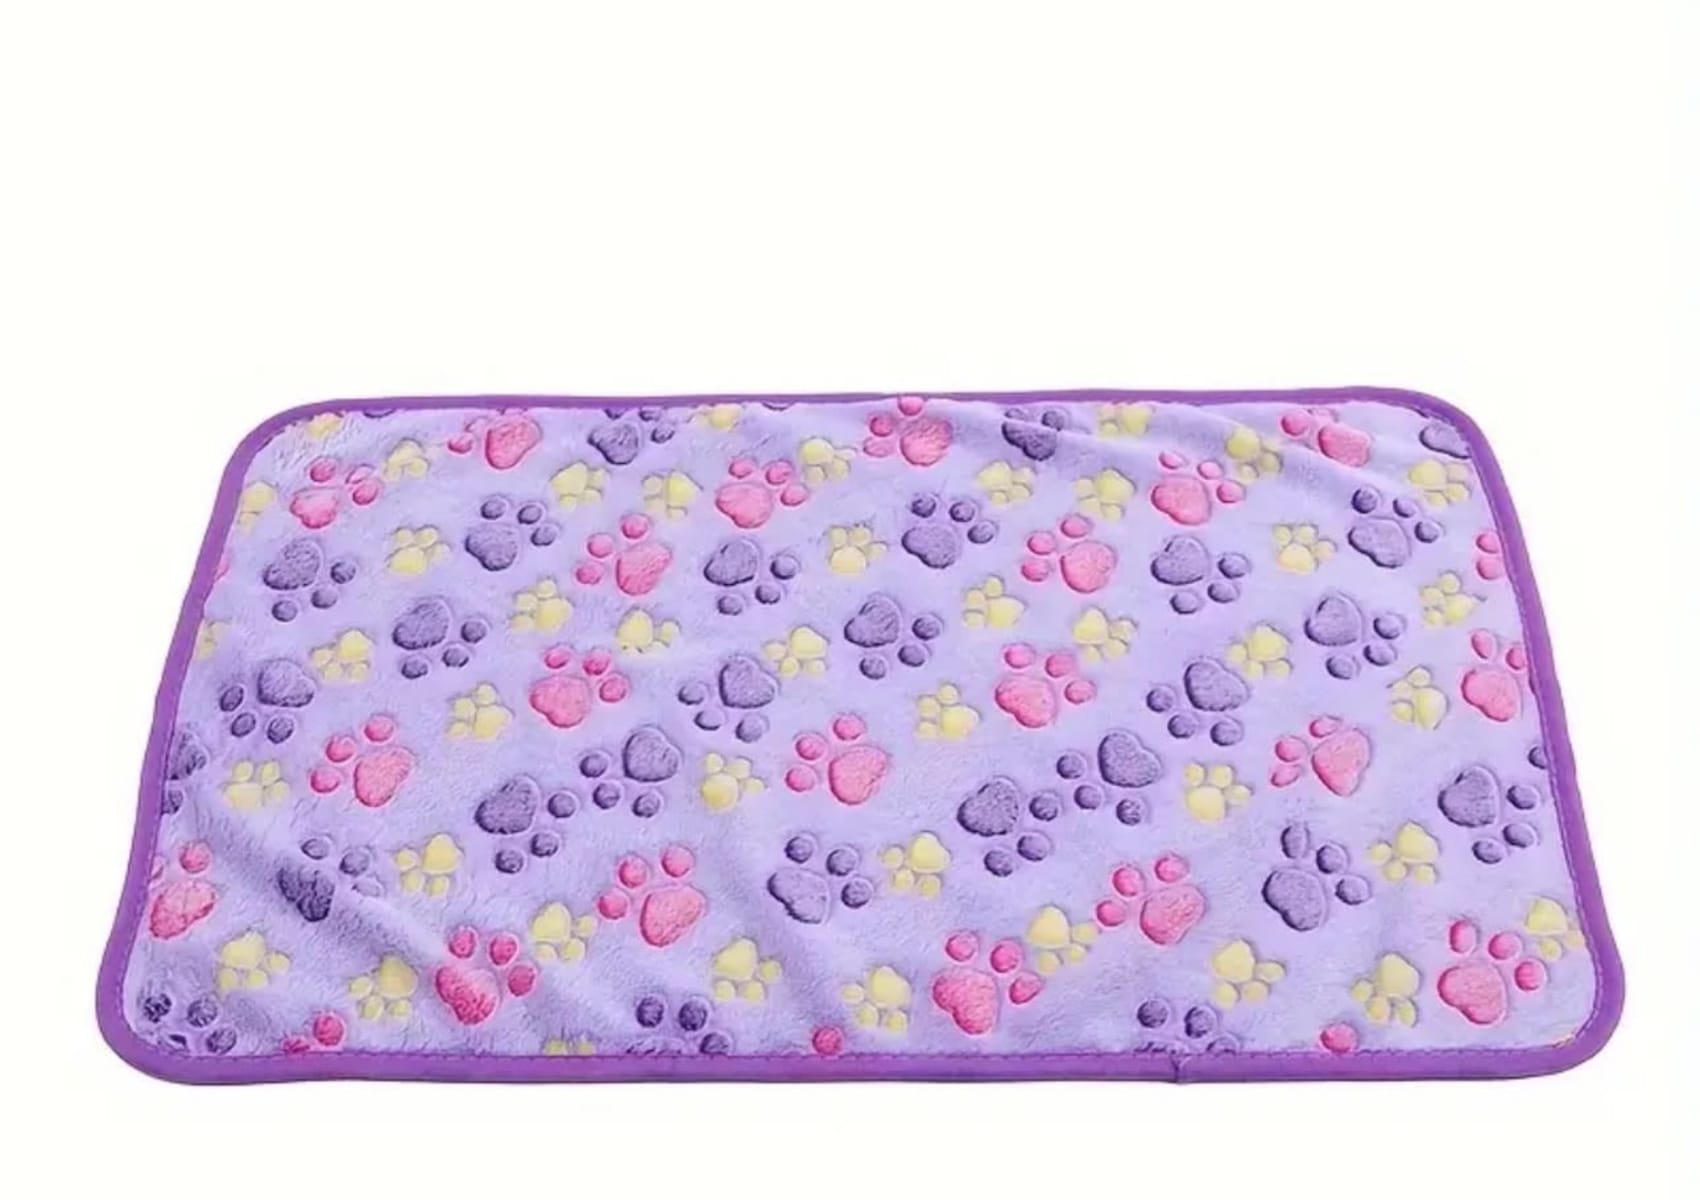 Soft snuggly purple paw print pattern blanket for your cat or dog